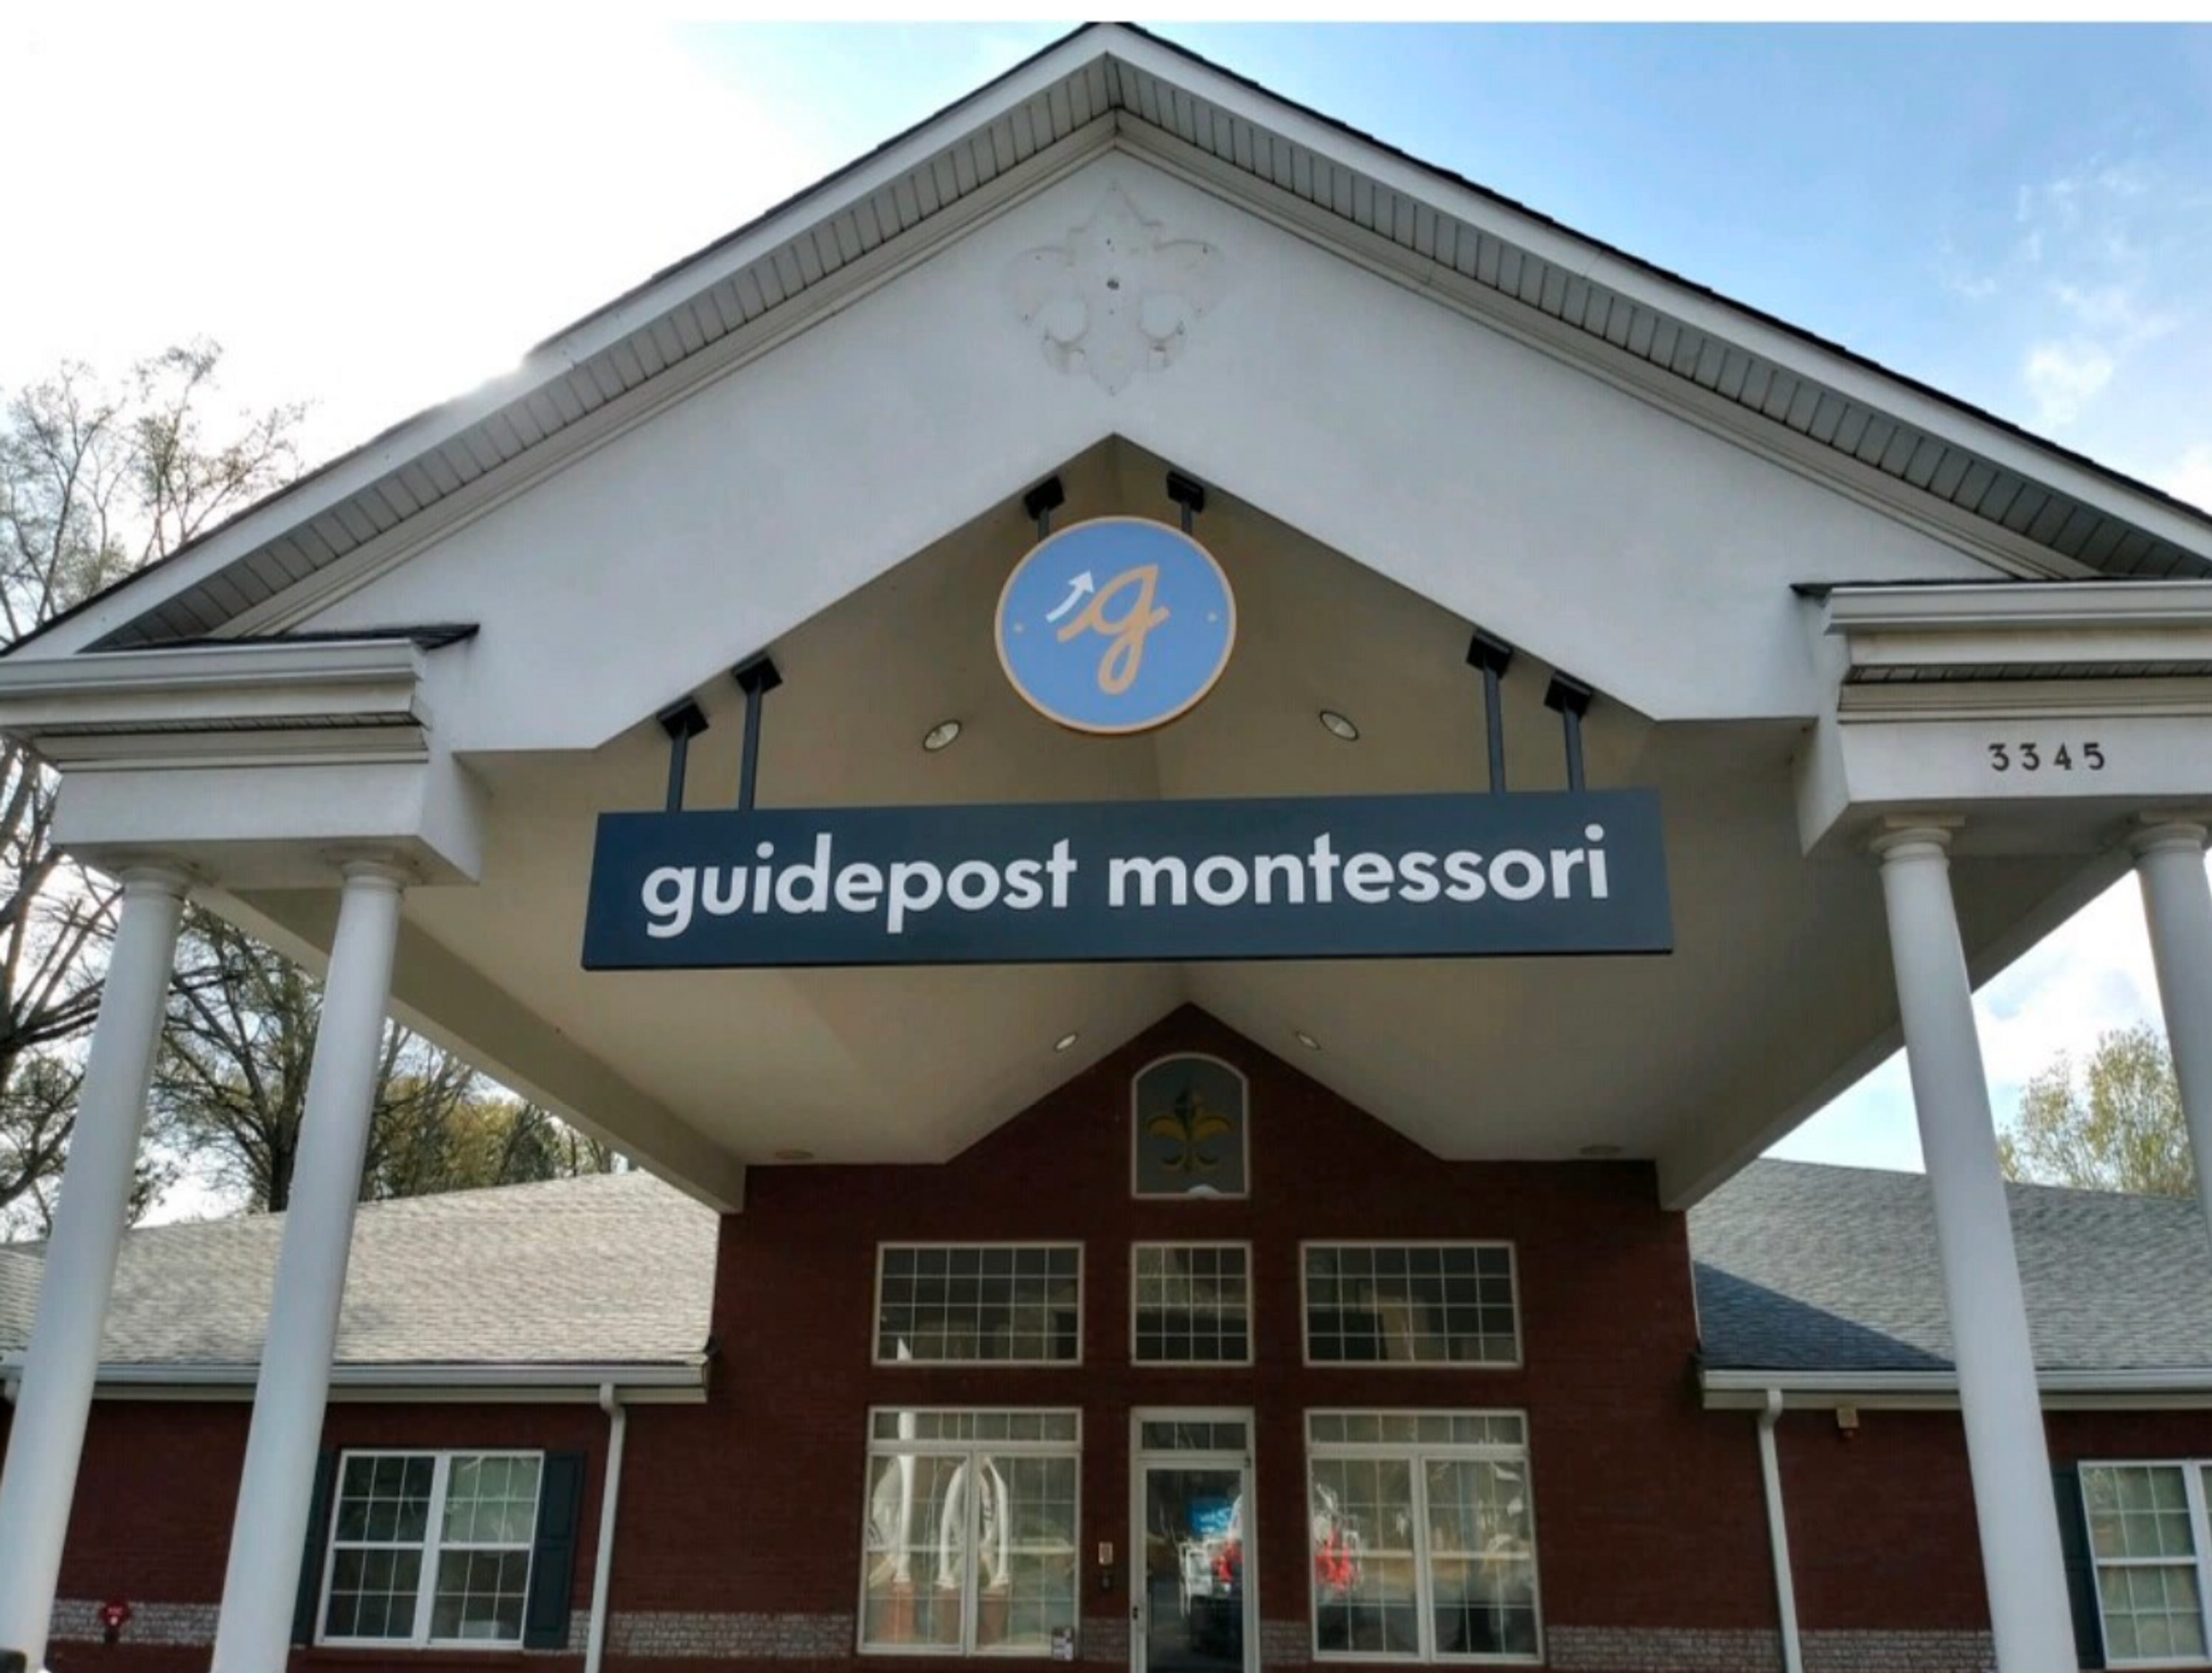 View of the entrance to Guidepost Montessori at Duluth that shows the pillared entryway leading to the glass doors and windows of the entrance. A branded Guidepost Montessori sign hangs from under the overhang.